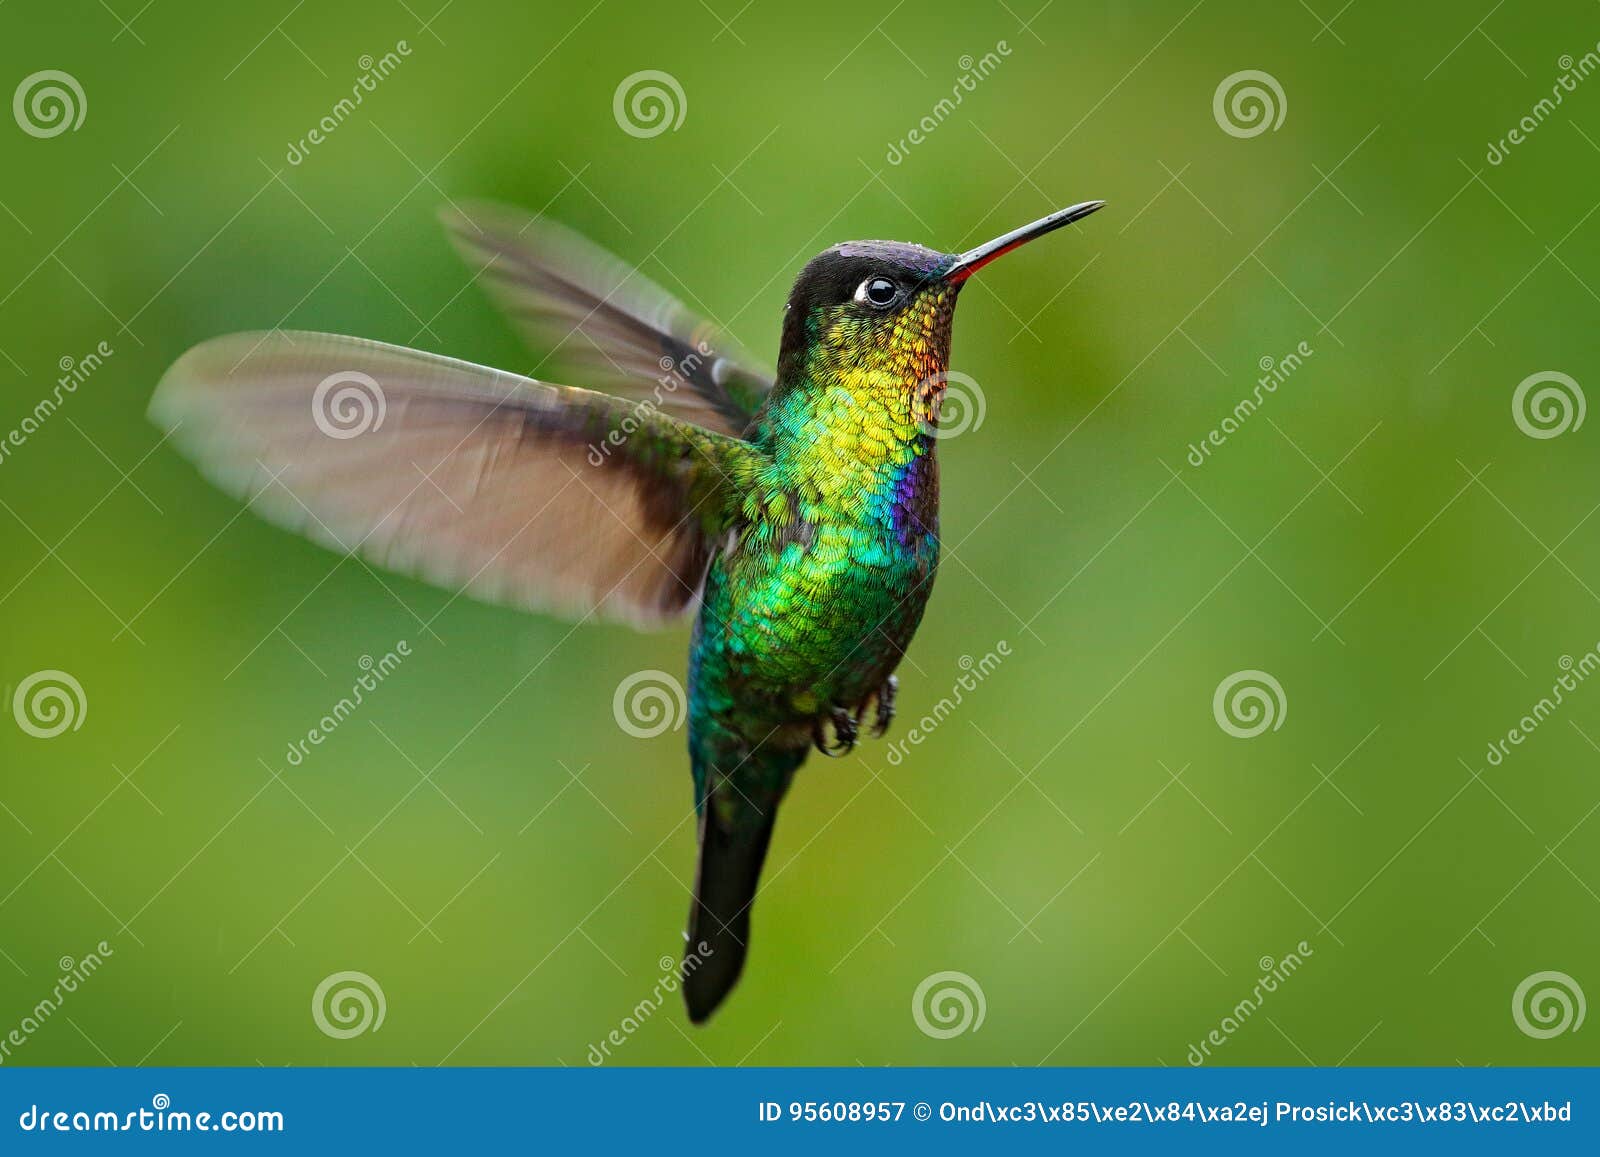 fiery-throated hummingbird, panterpe insignis, shiny colour bird in fly. wildlife flight action scene from tropic forest. red glos